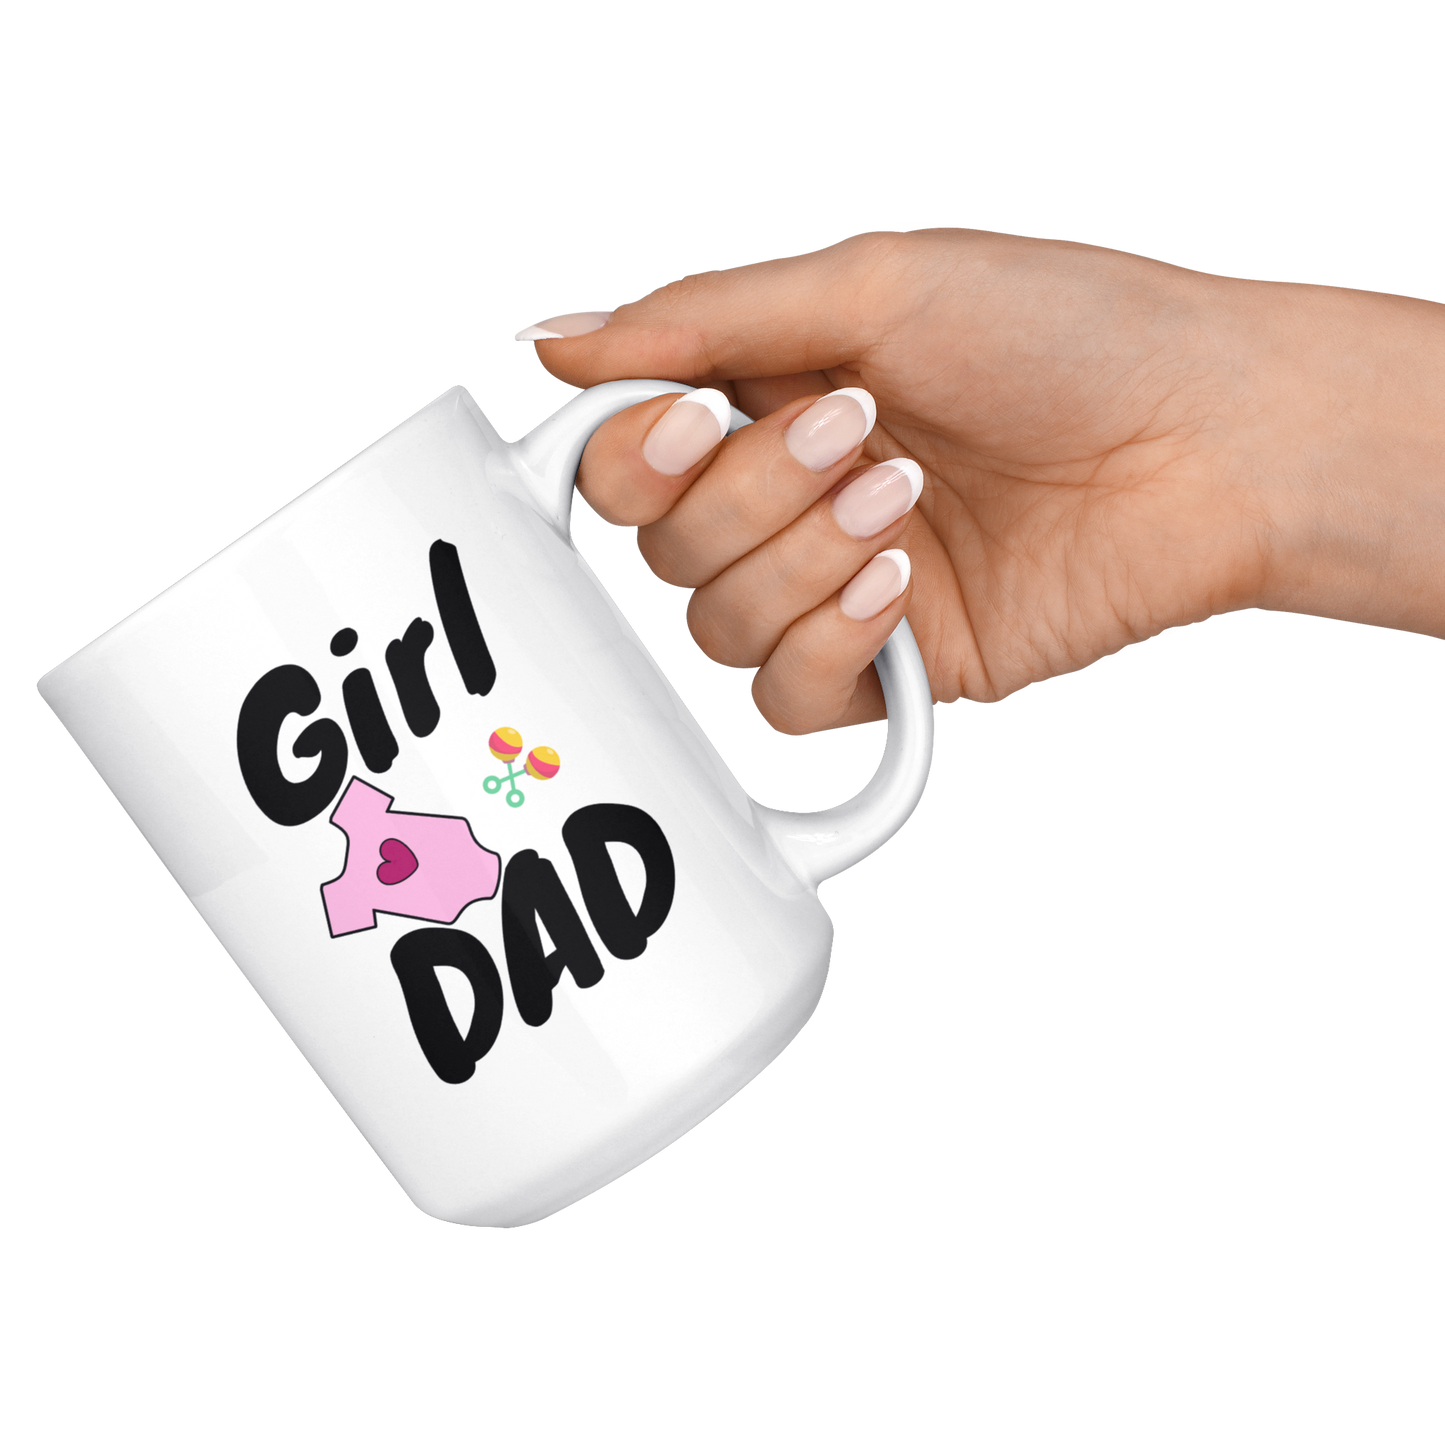 Dad Mug - 'Girl Dad' (Black) - Makes a great gift for Birthdays, Christmas, Father's Day or anytime!